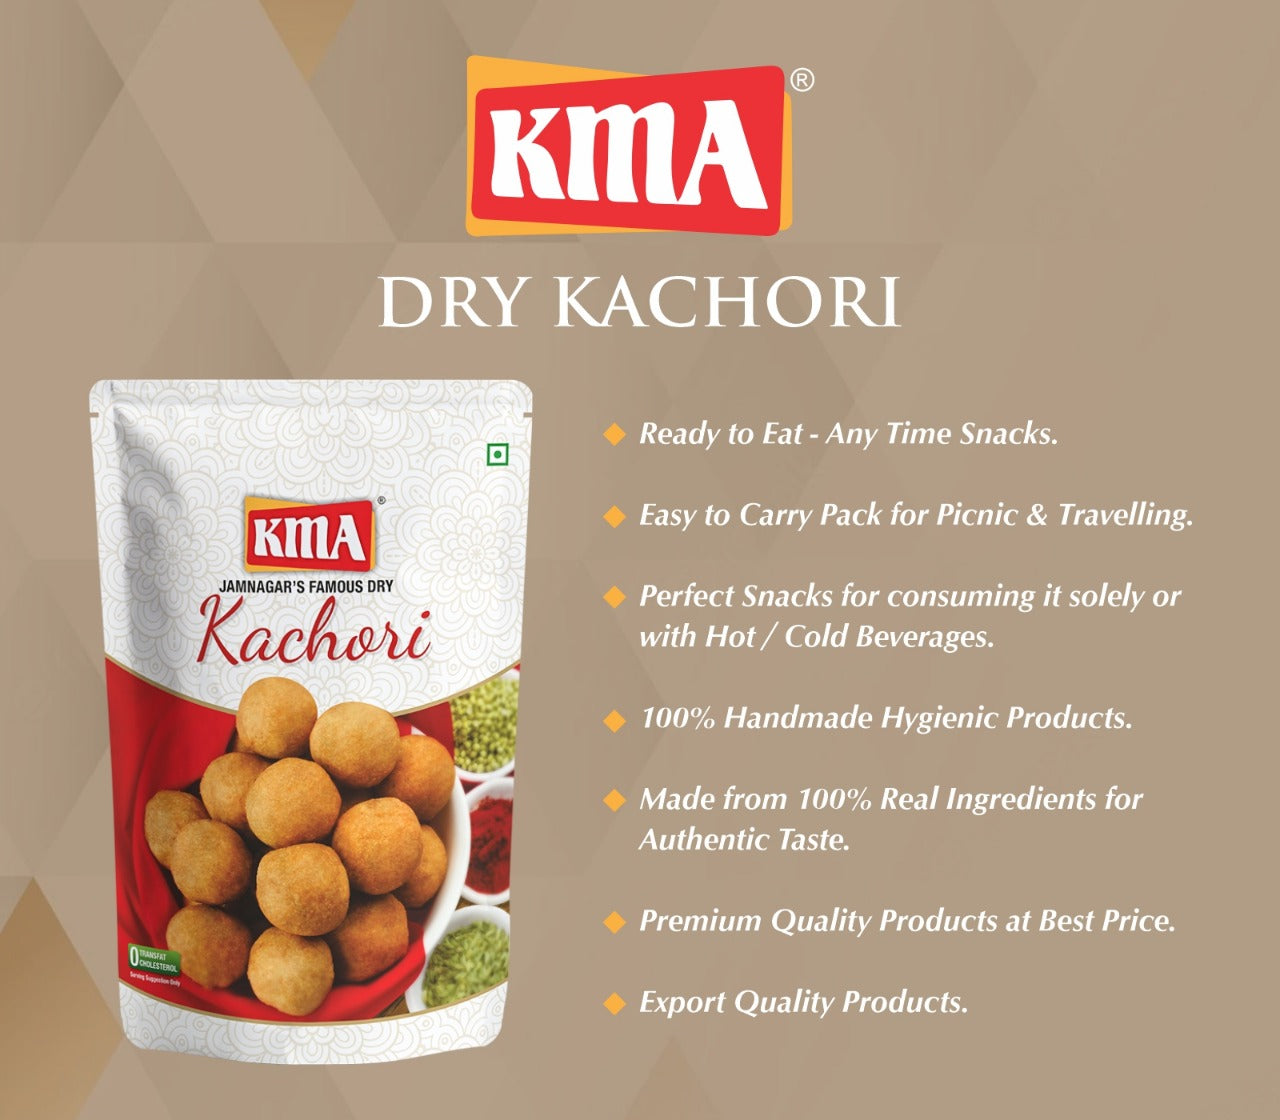 Don't miss out on the chance to try this mouth-watering snack! KMA Dry Kachori bring a delightful combination of sweet and spicy flavors from Jamnagar, India. Made from a blend of quality spices and stuffed with deliciousness in every bite, KMA Dry Kachori offers a classic taste that is perfect for any occasion. Plus, it is manufactured fresh in the same month to ensure the highest quality. 